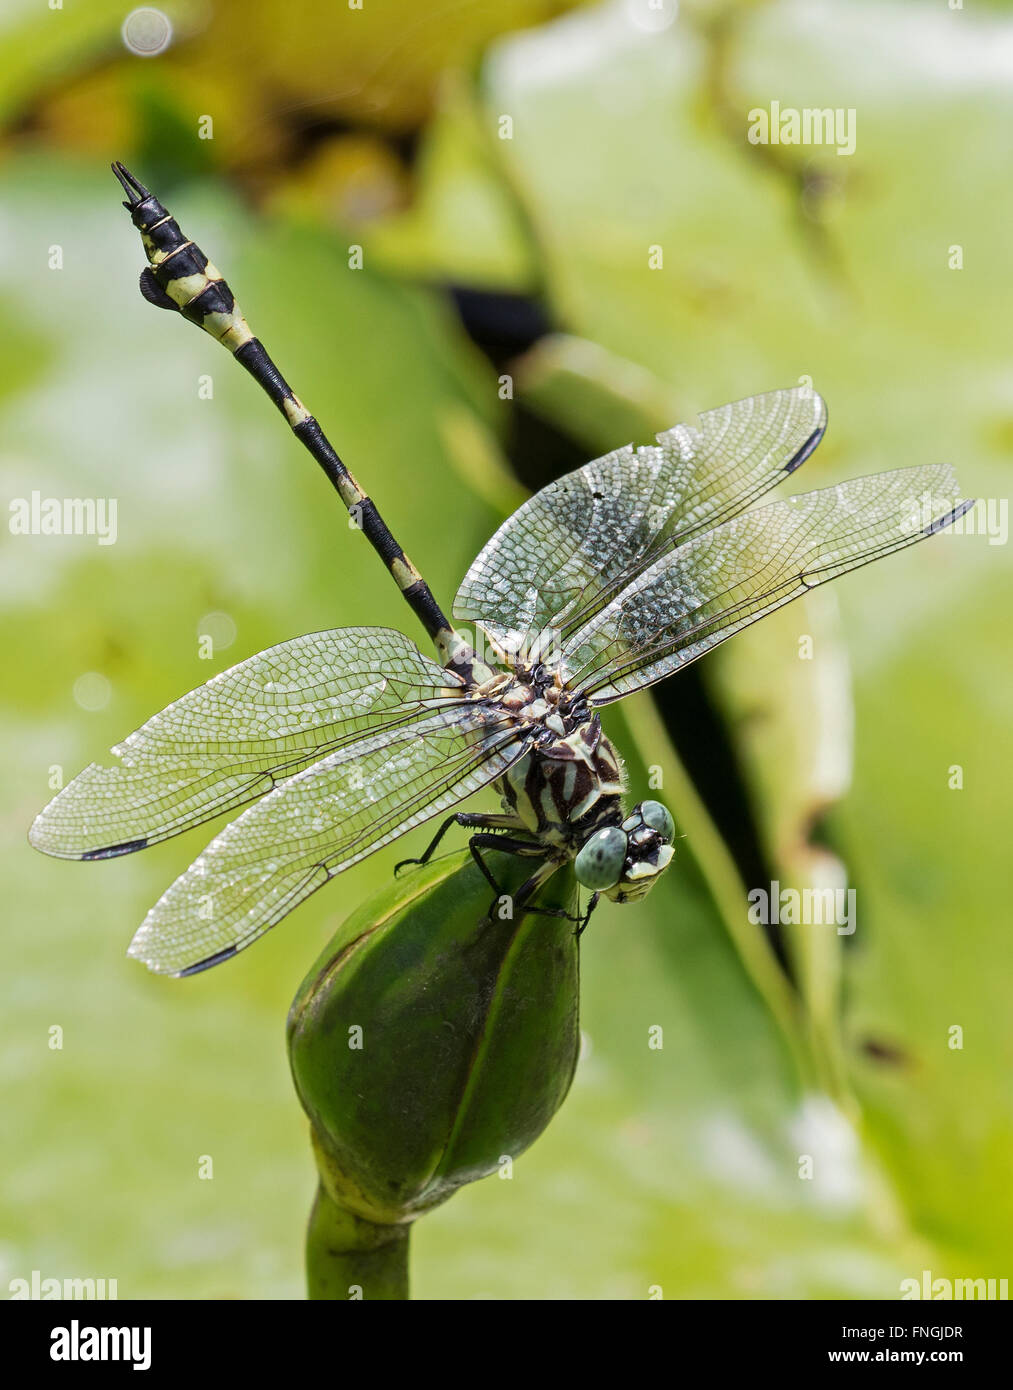 australian, tiger, dragonfly, close-up, insect Stock Photo